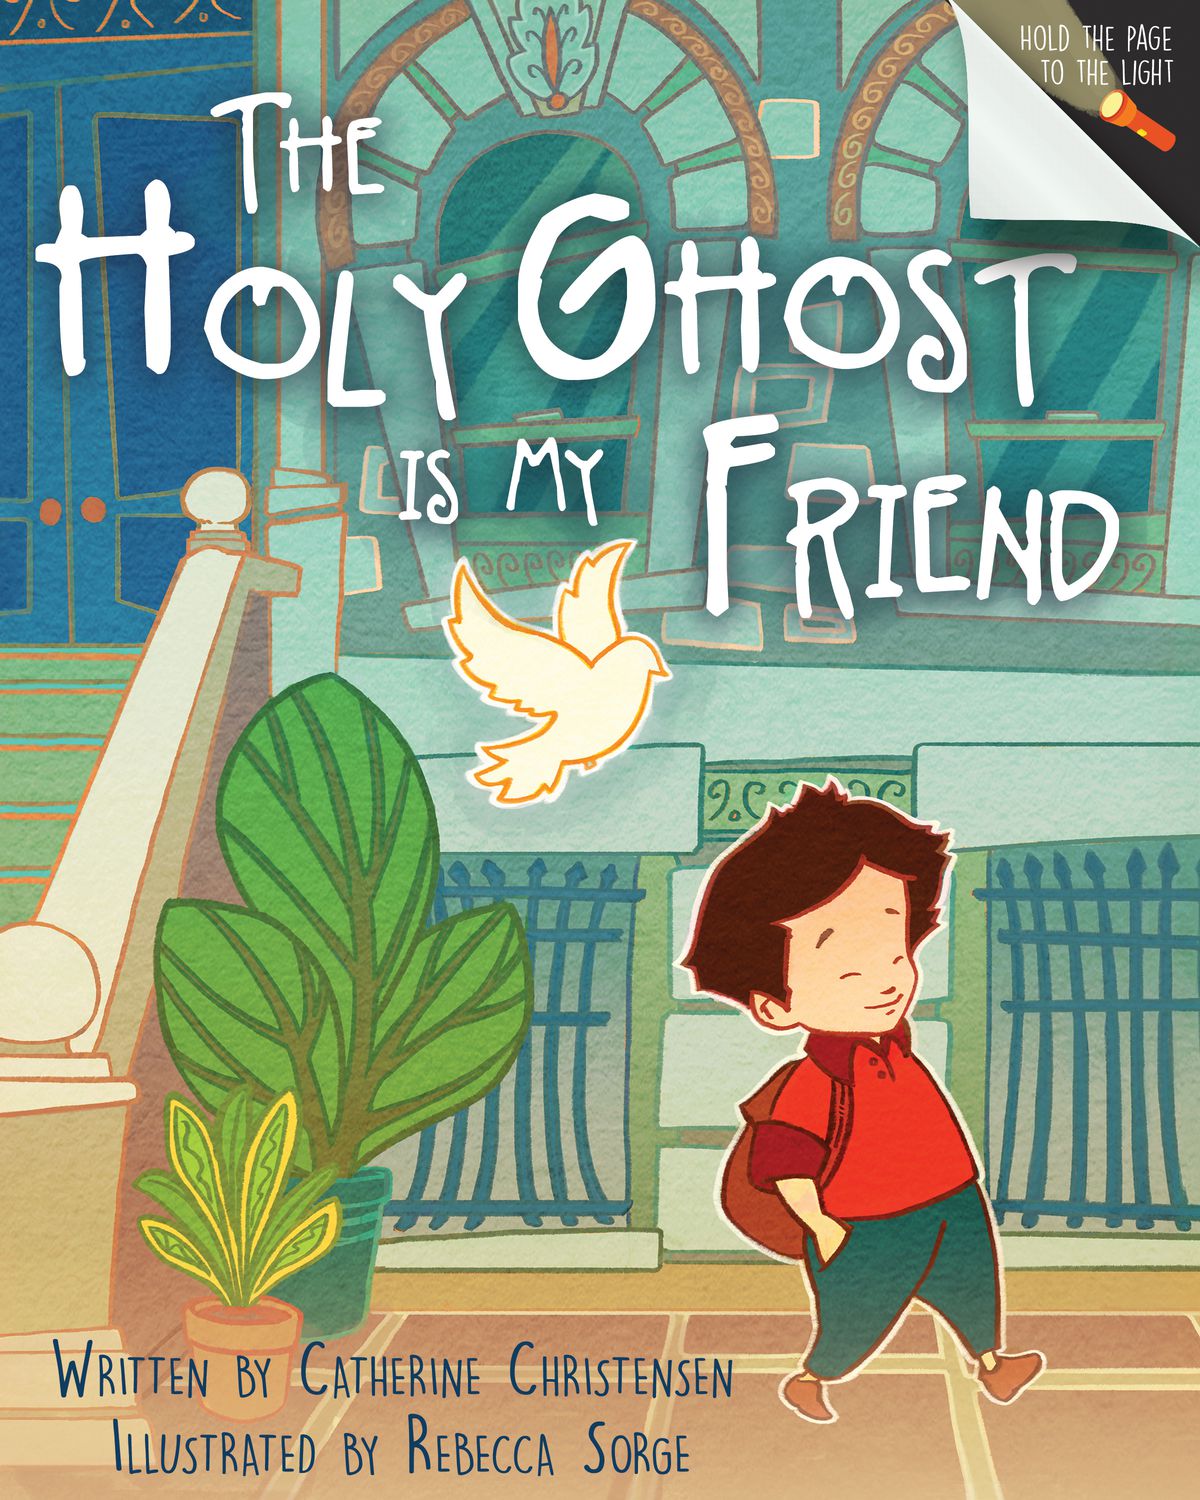 "The Holy Ghost is My Friend" is by Catherine Christensen and illustrated by Rebecca Sorge.